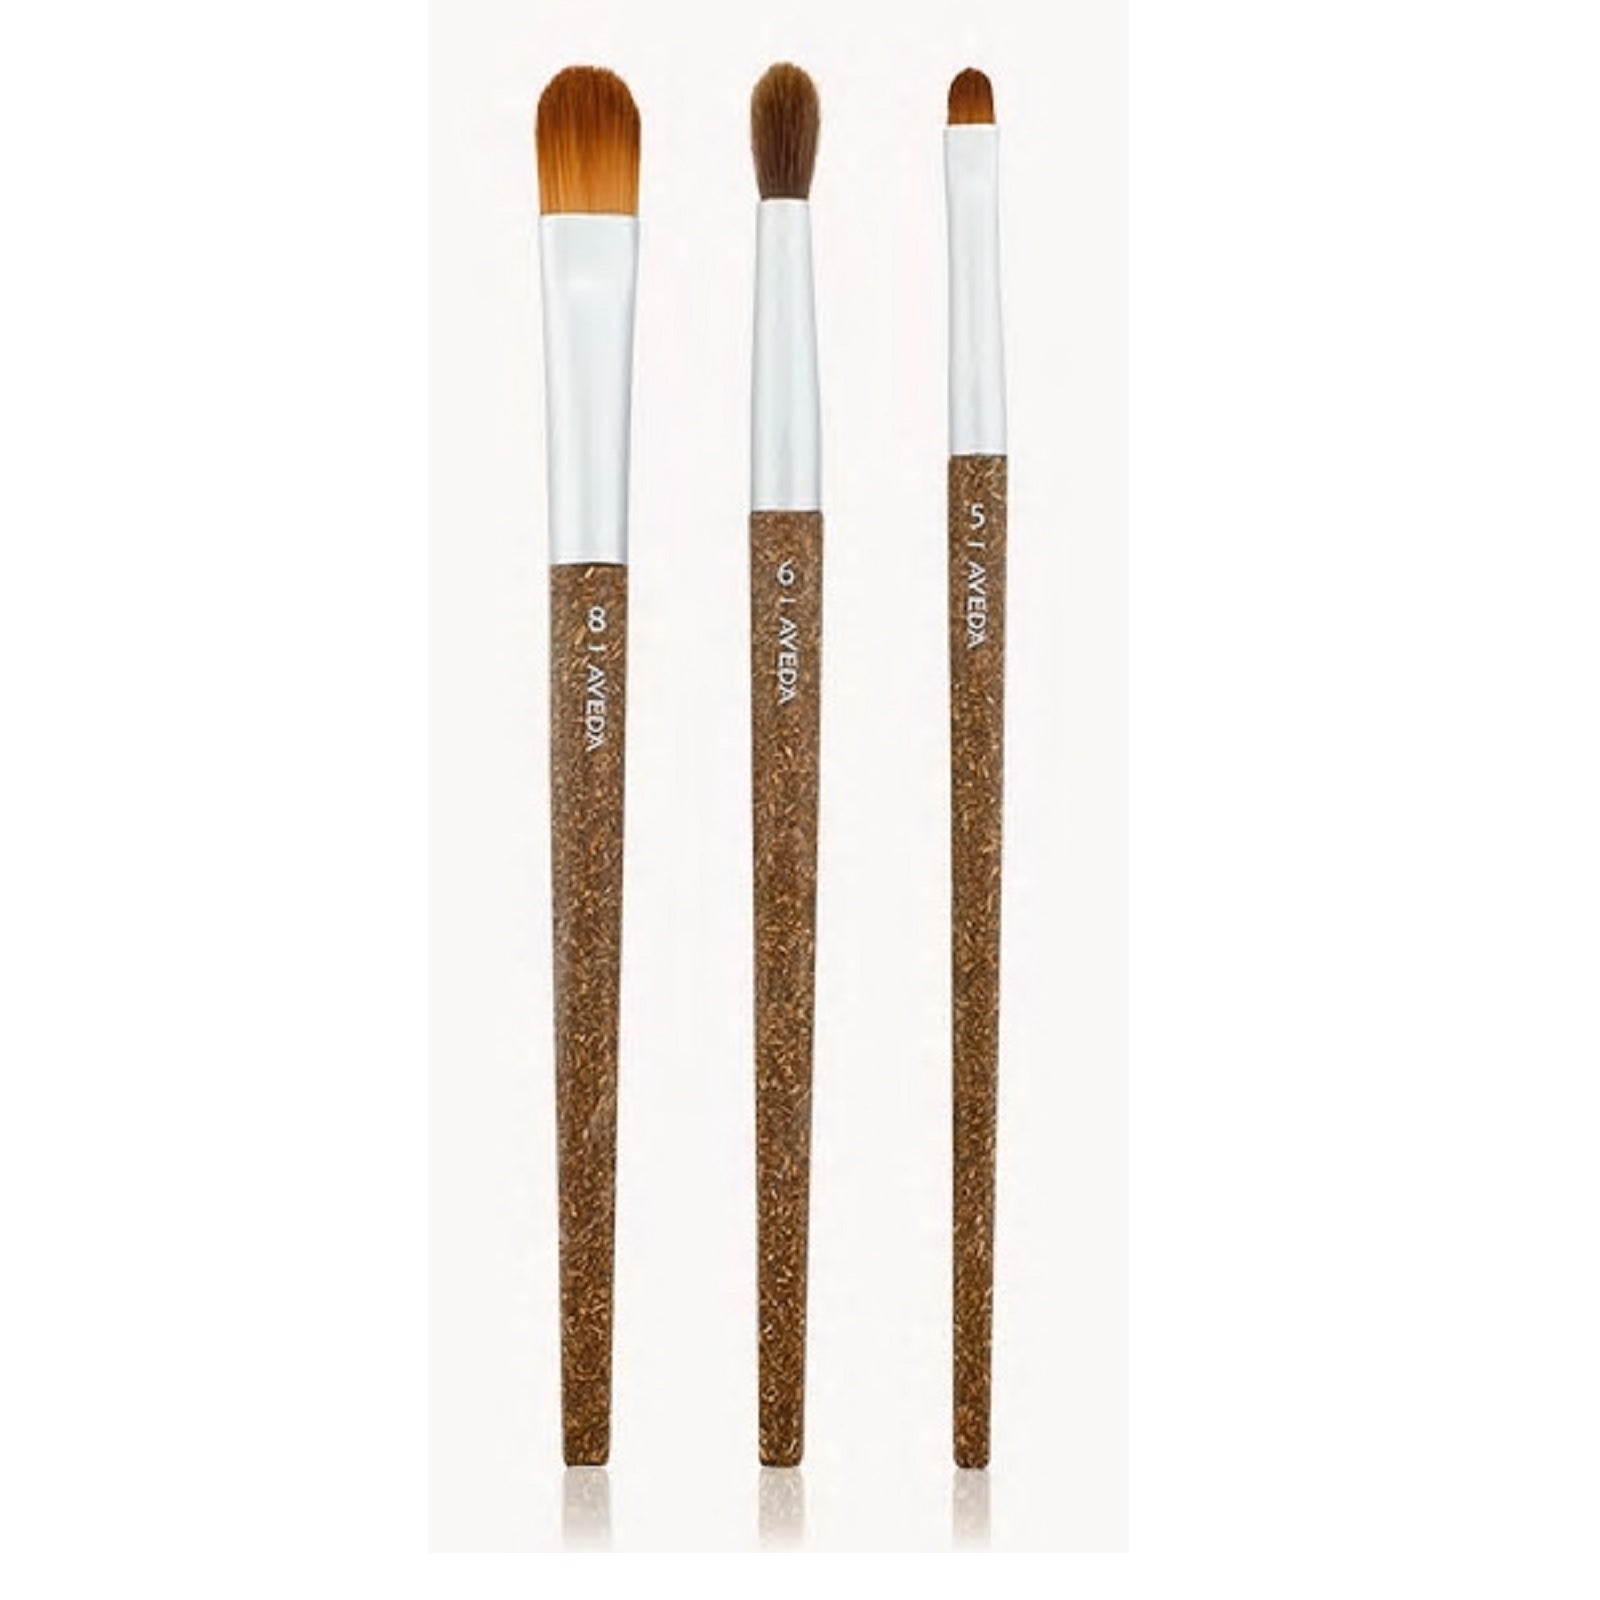 AVEDA NIB Flax Sticks Special Effects Brush Set of 3 Brushes (eye and complexion) #5 #6 #8